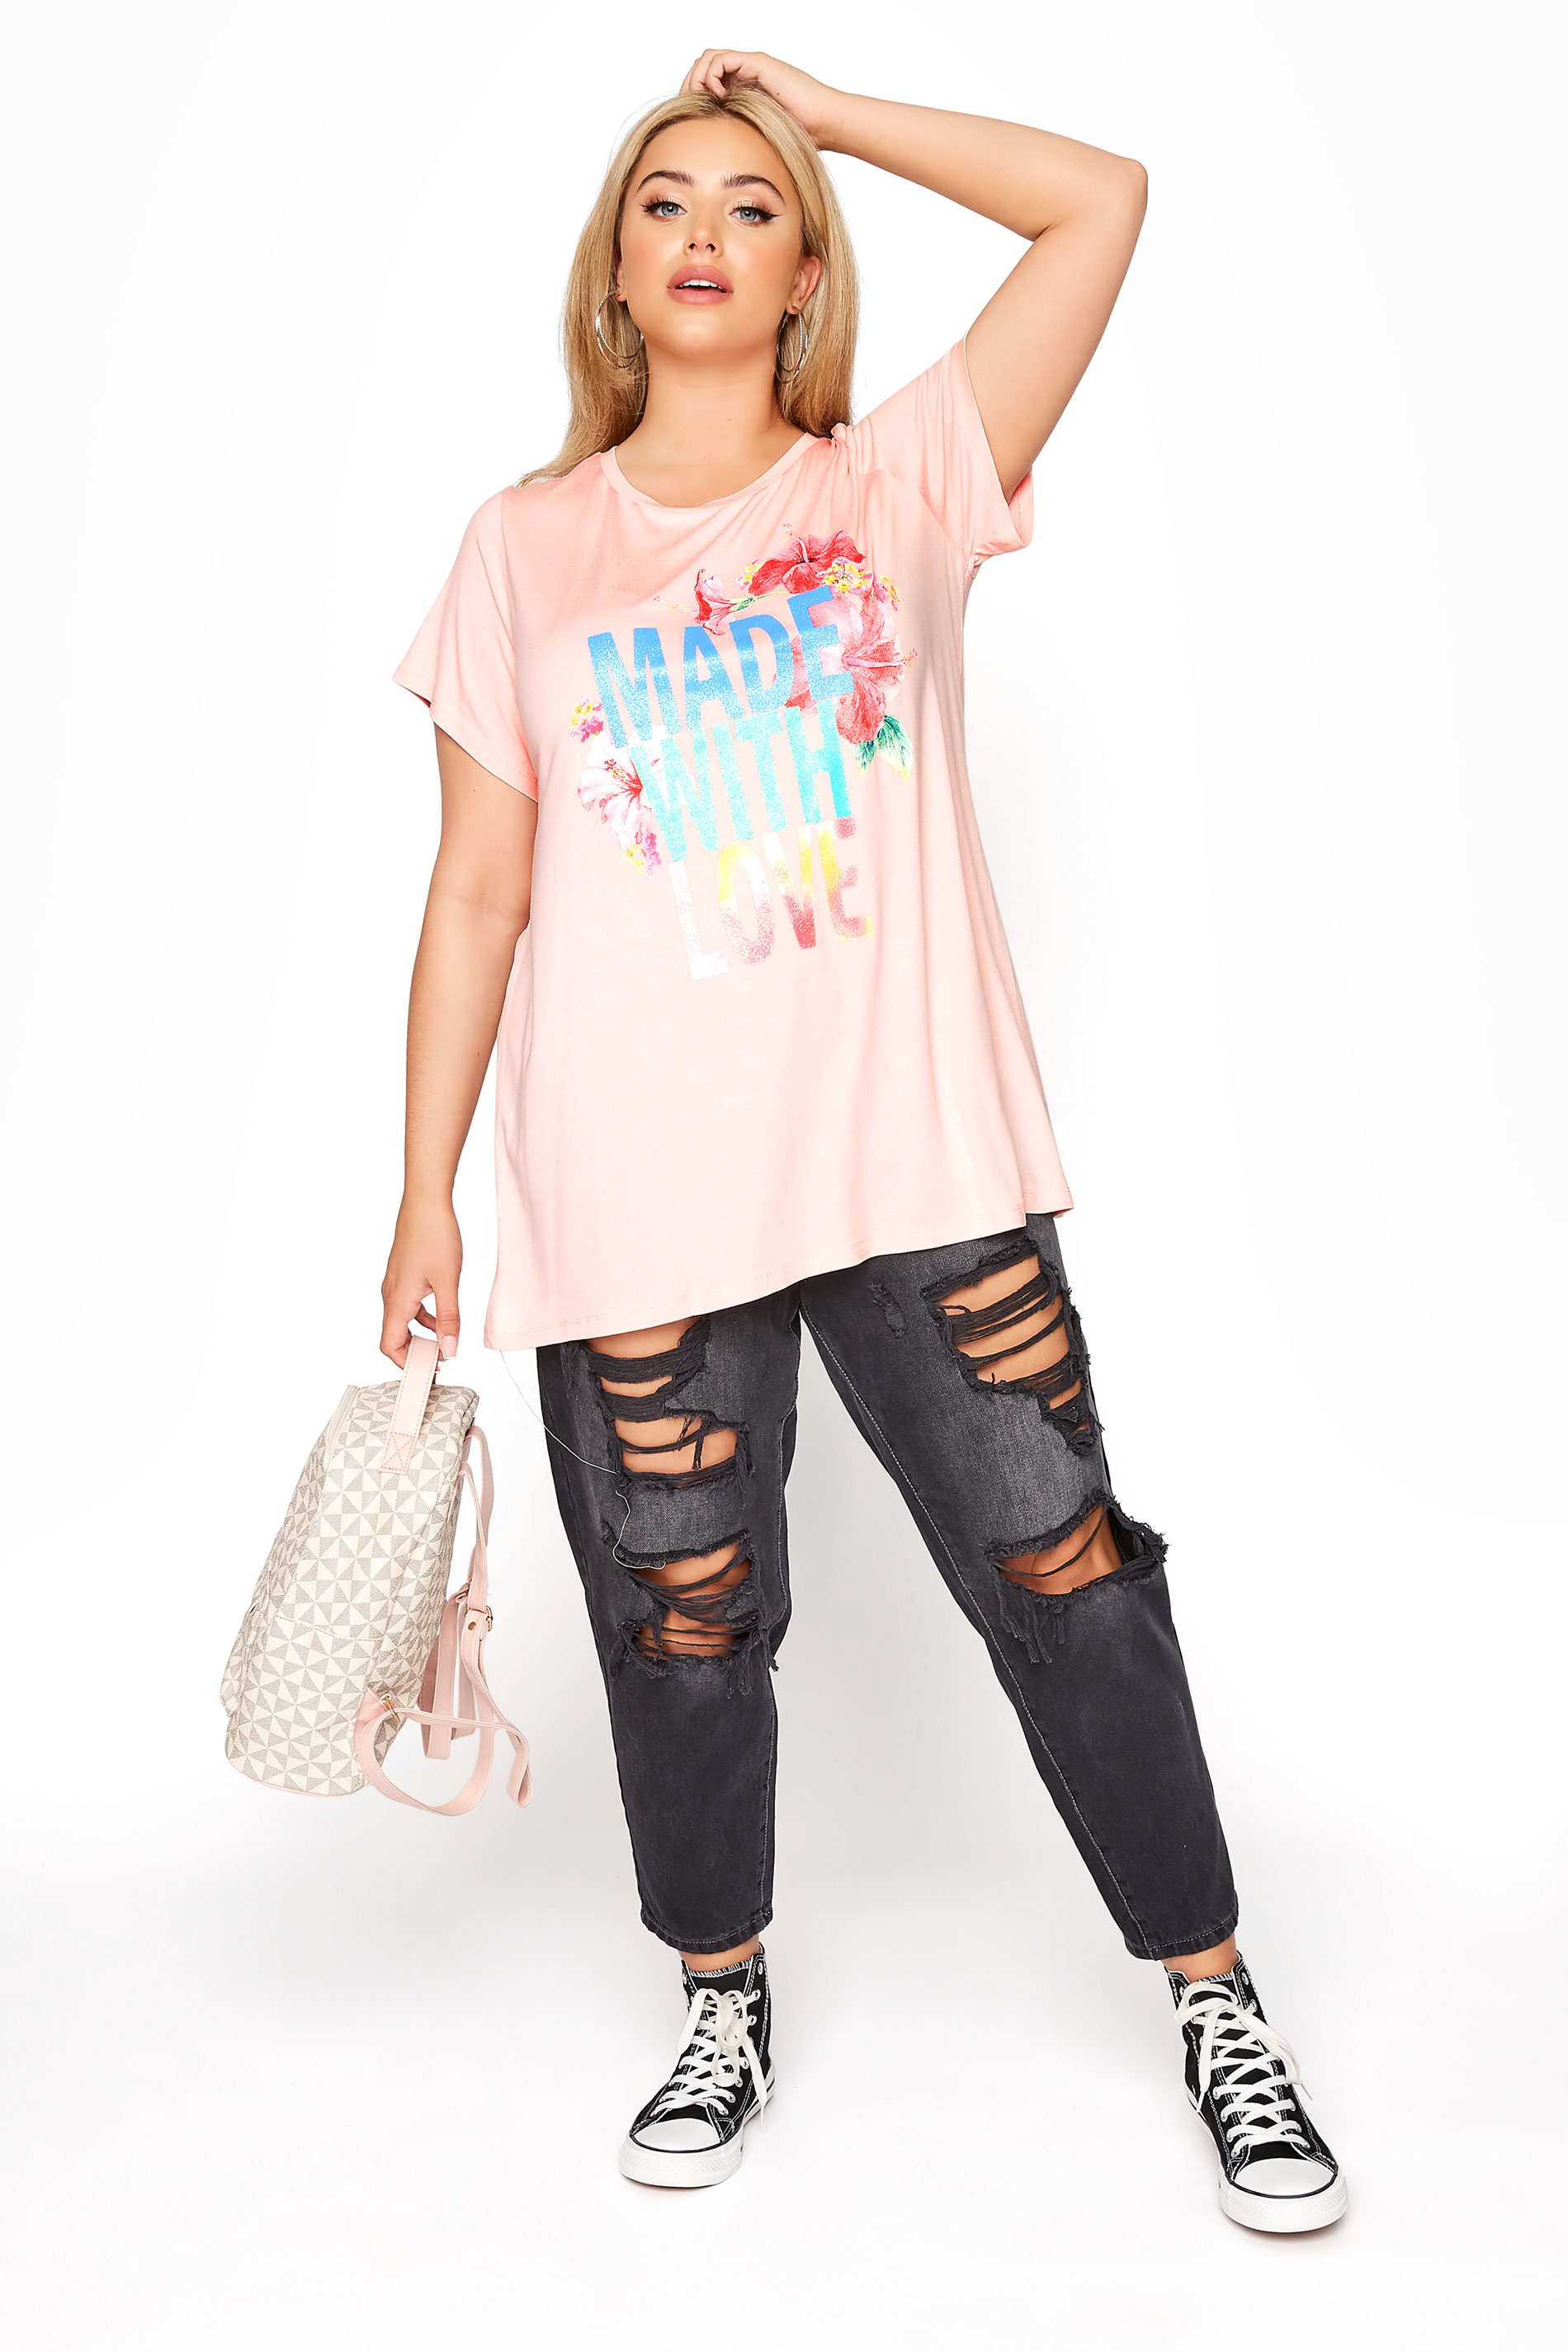 Grande taille  Tops Grande taille  Tops Casual | T-Shirt Rose Slogan 'Made With Love' - HH63732